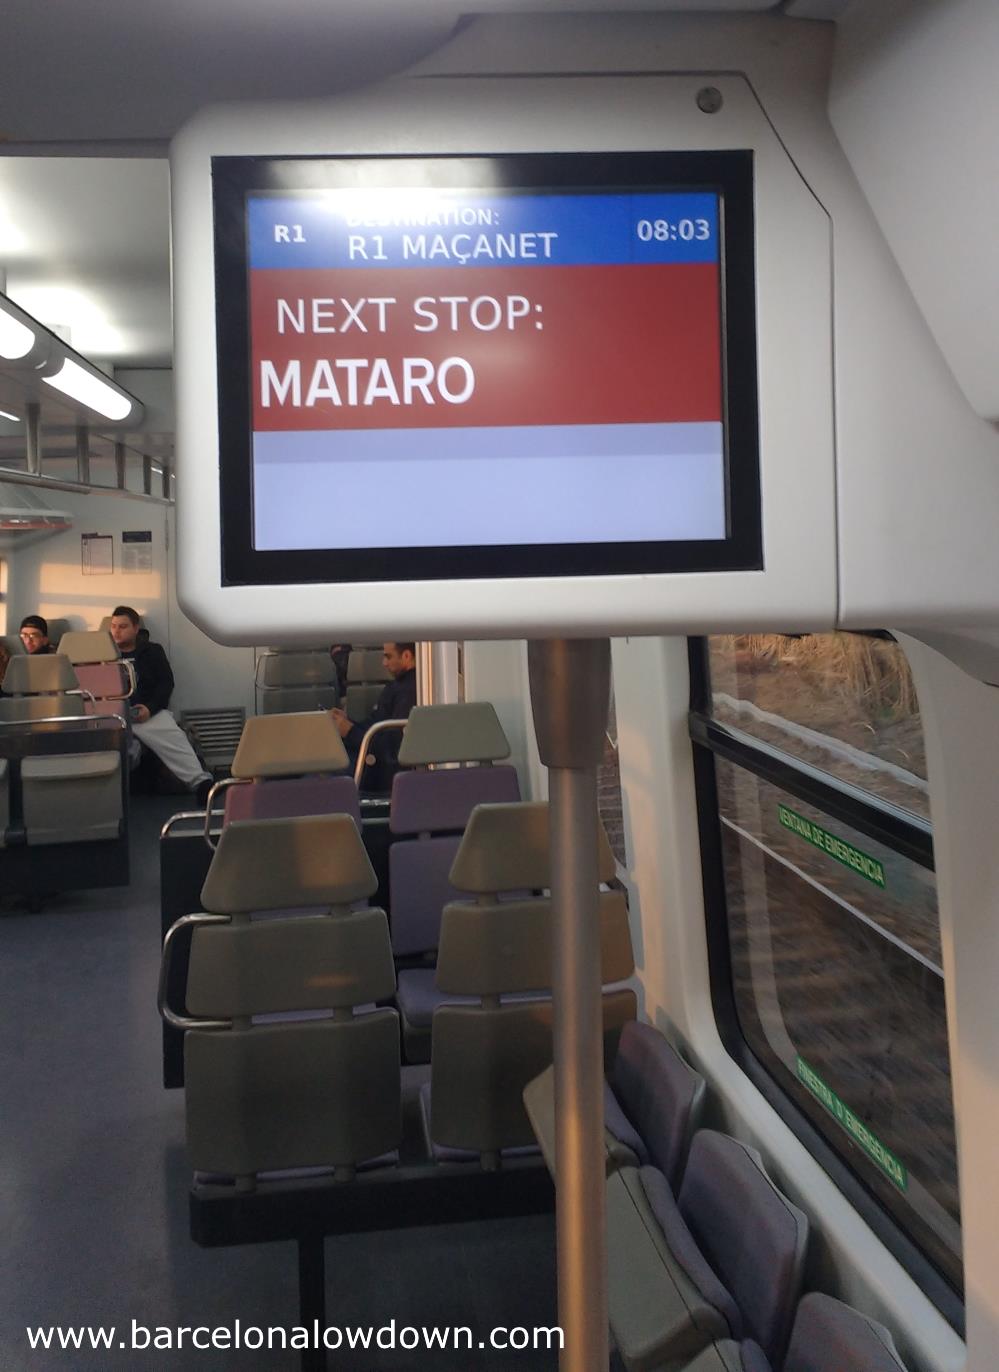 Interior of a Barcelona commuter train showing the information screens